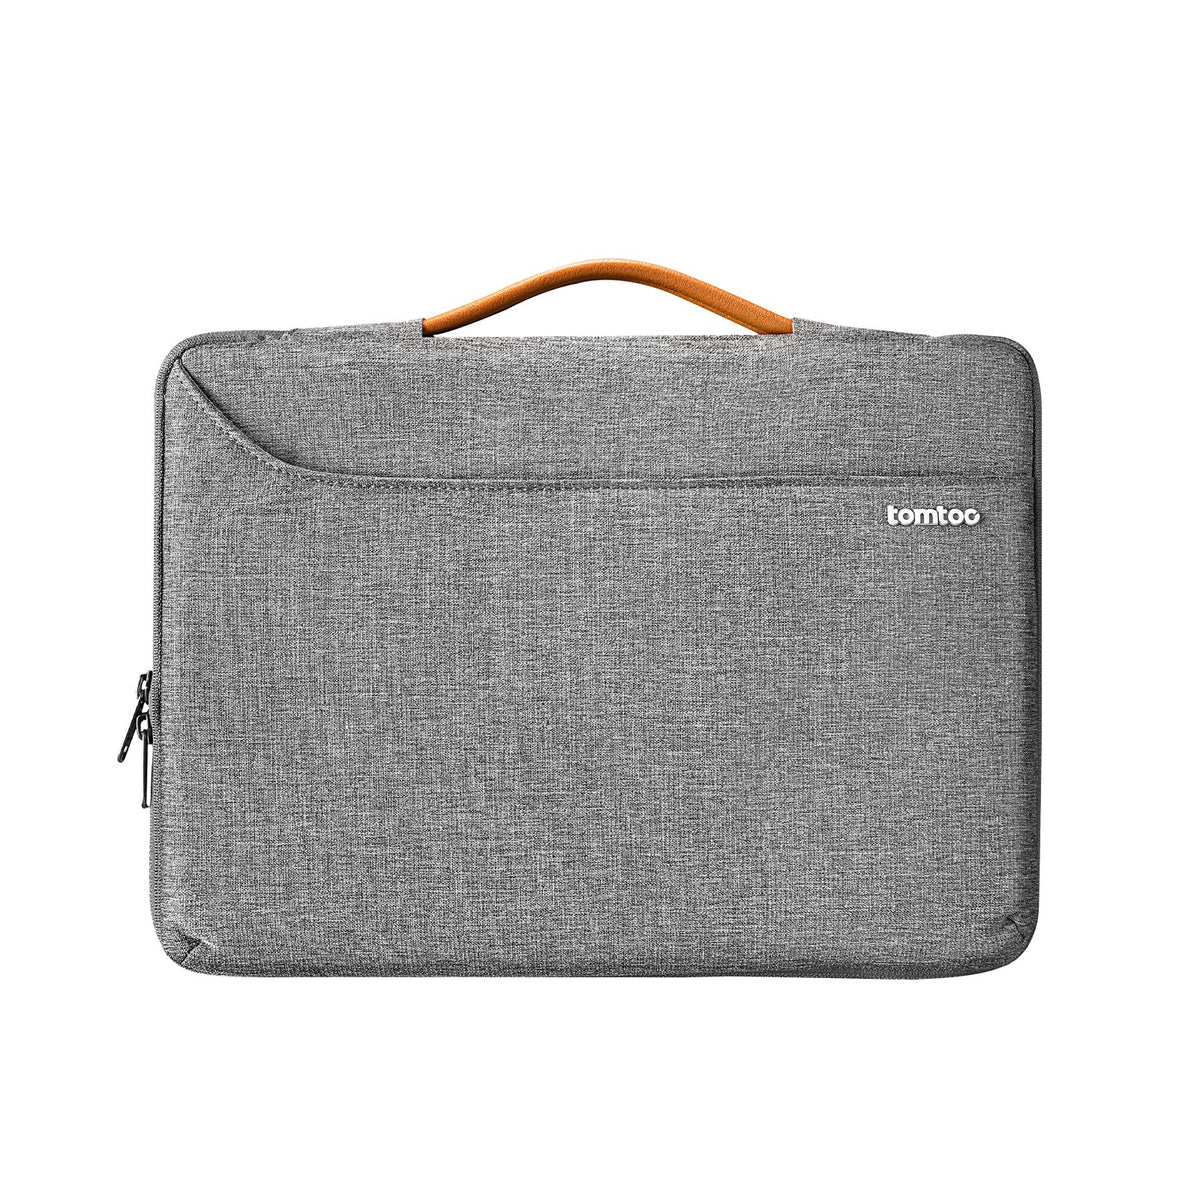 primary_Defender-A22 Laptop Briefcase for 16-inch MacBook Pro | Gray